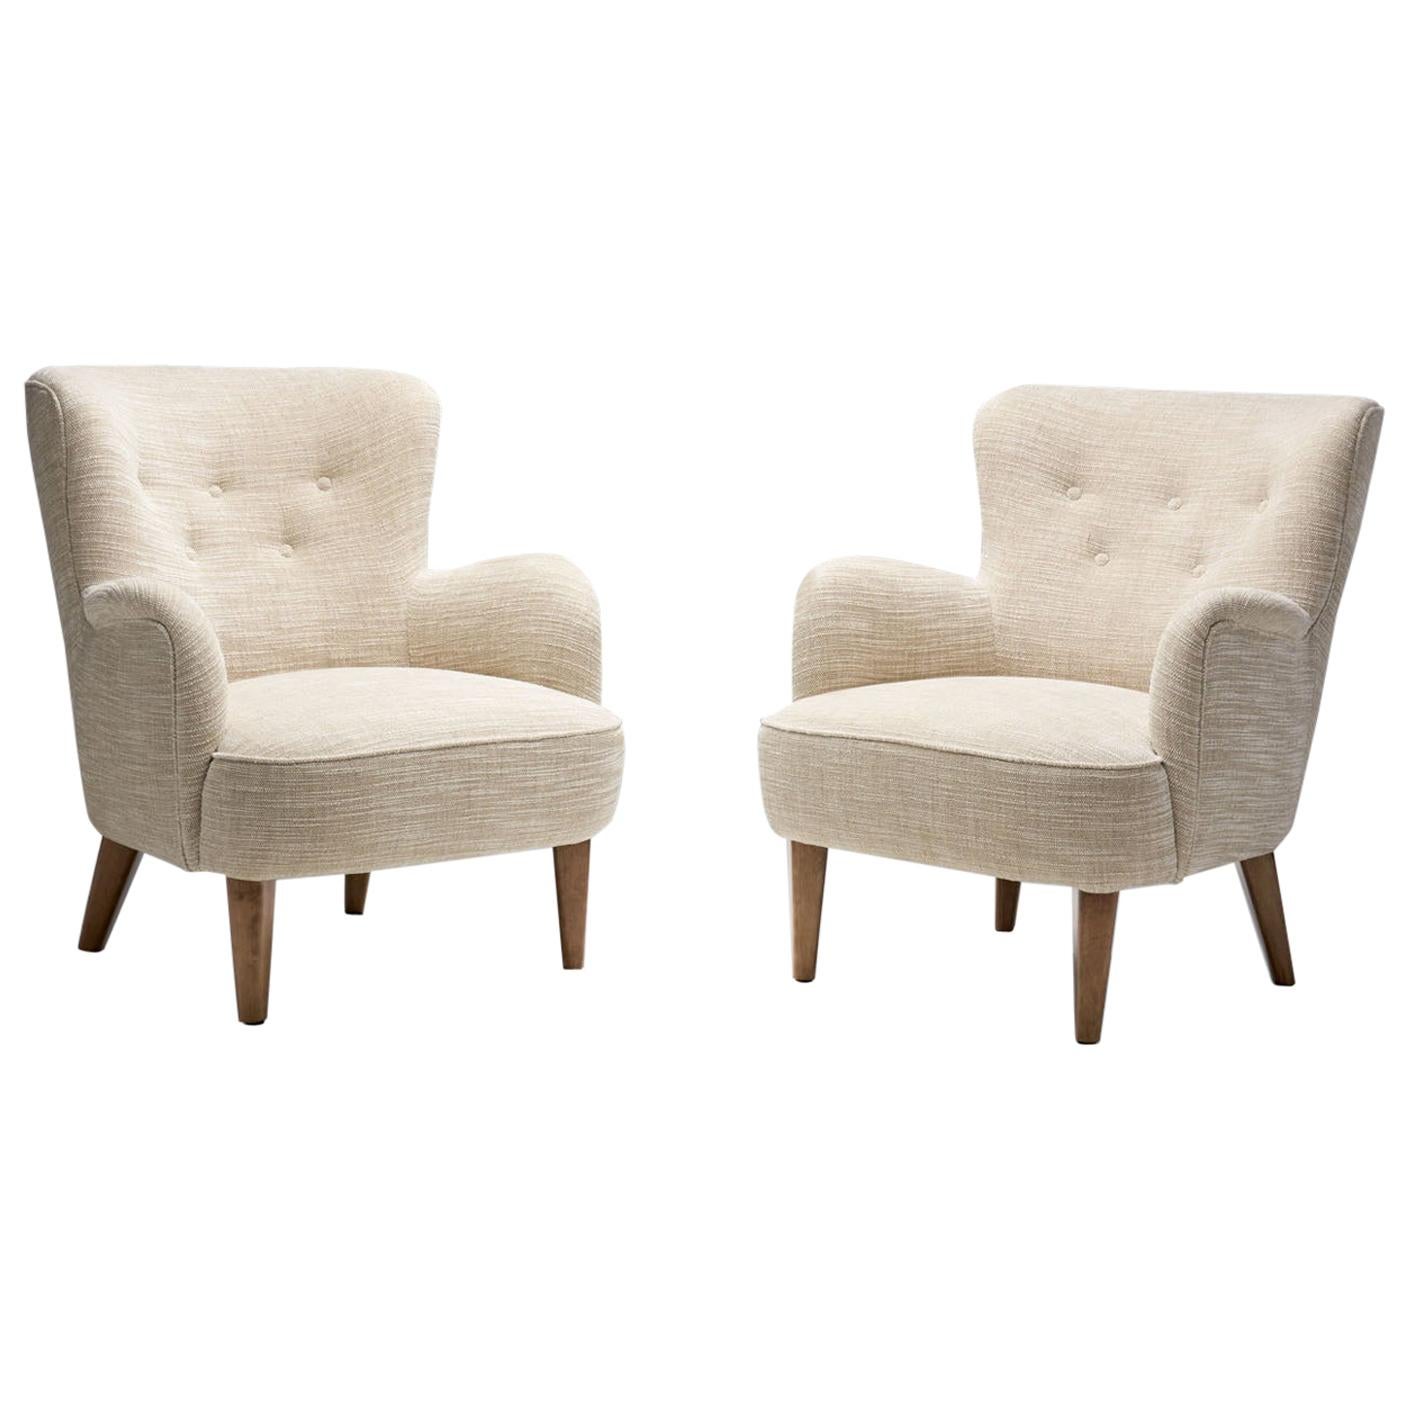 Pair of Mid-Century Armchairs by a Swedish Cabinetmaker, Sweden, ca 1950s